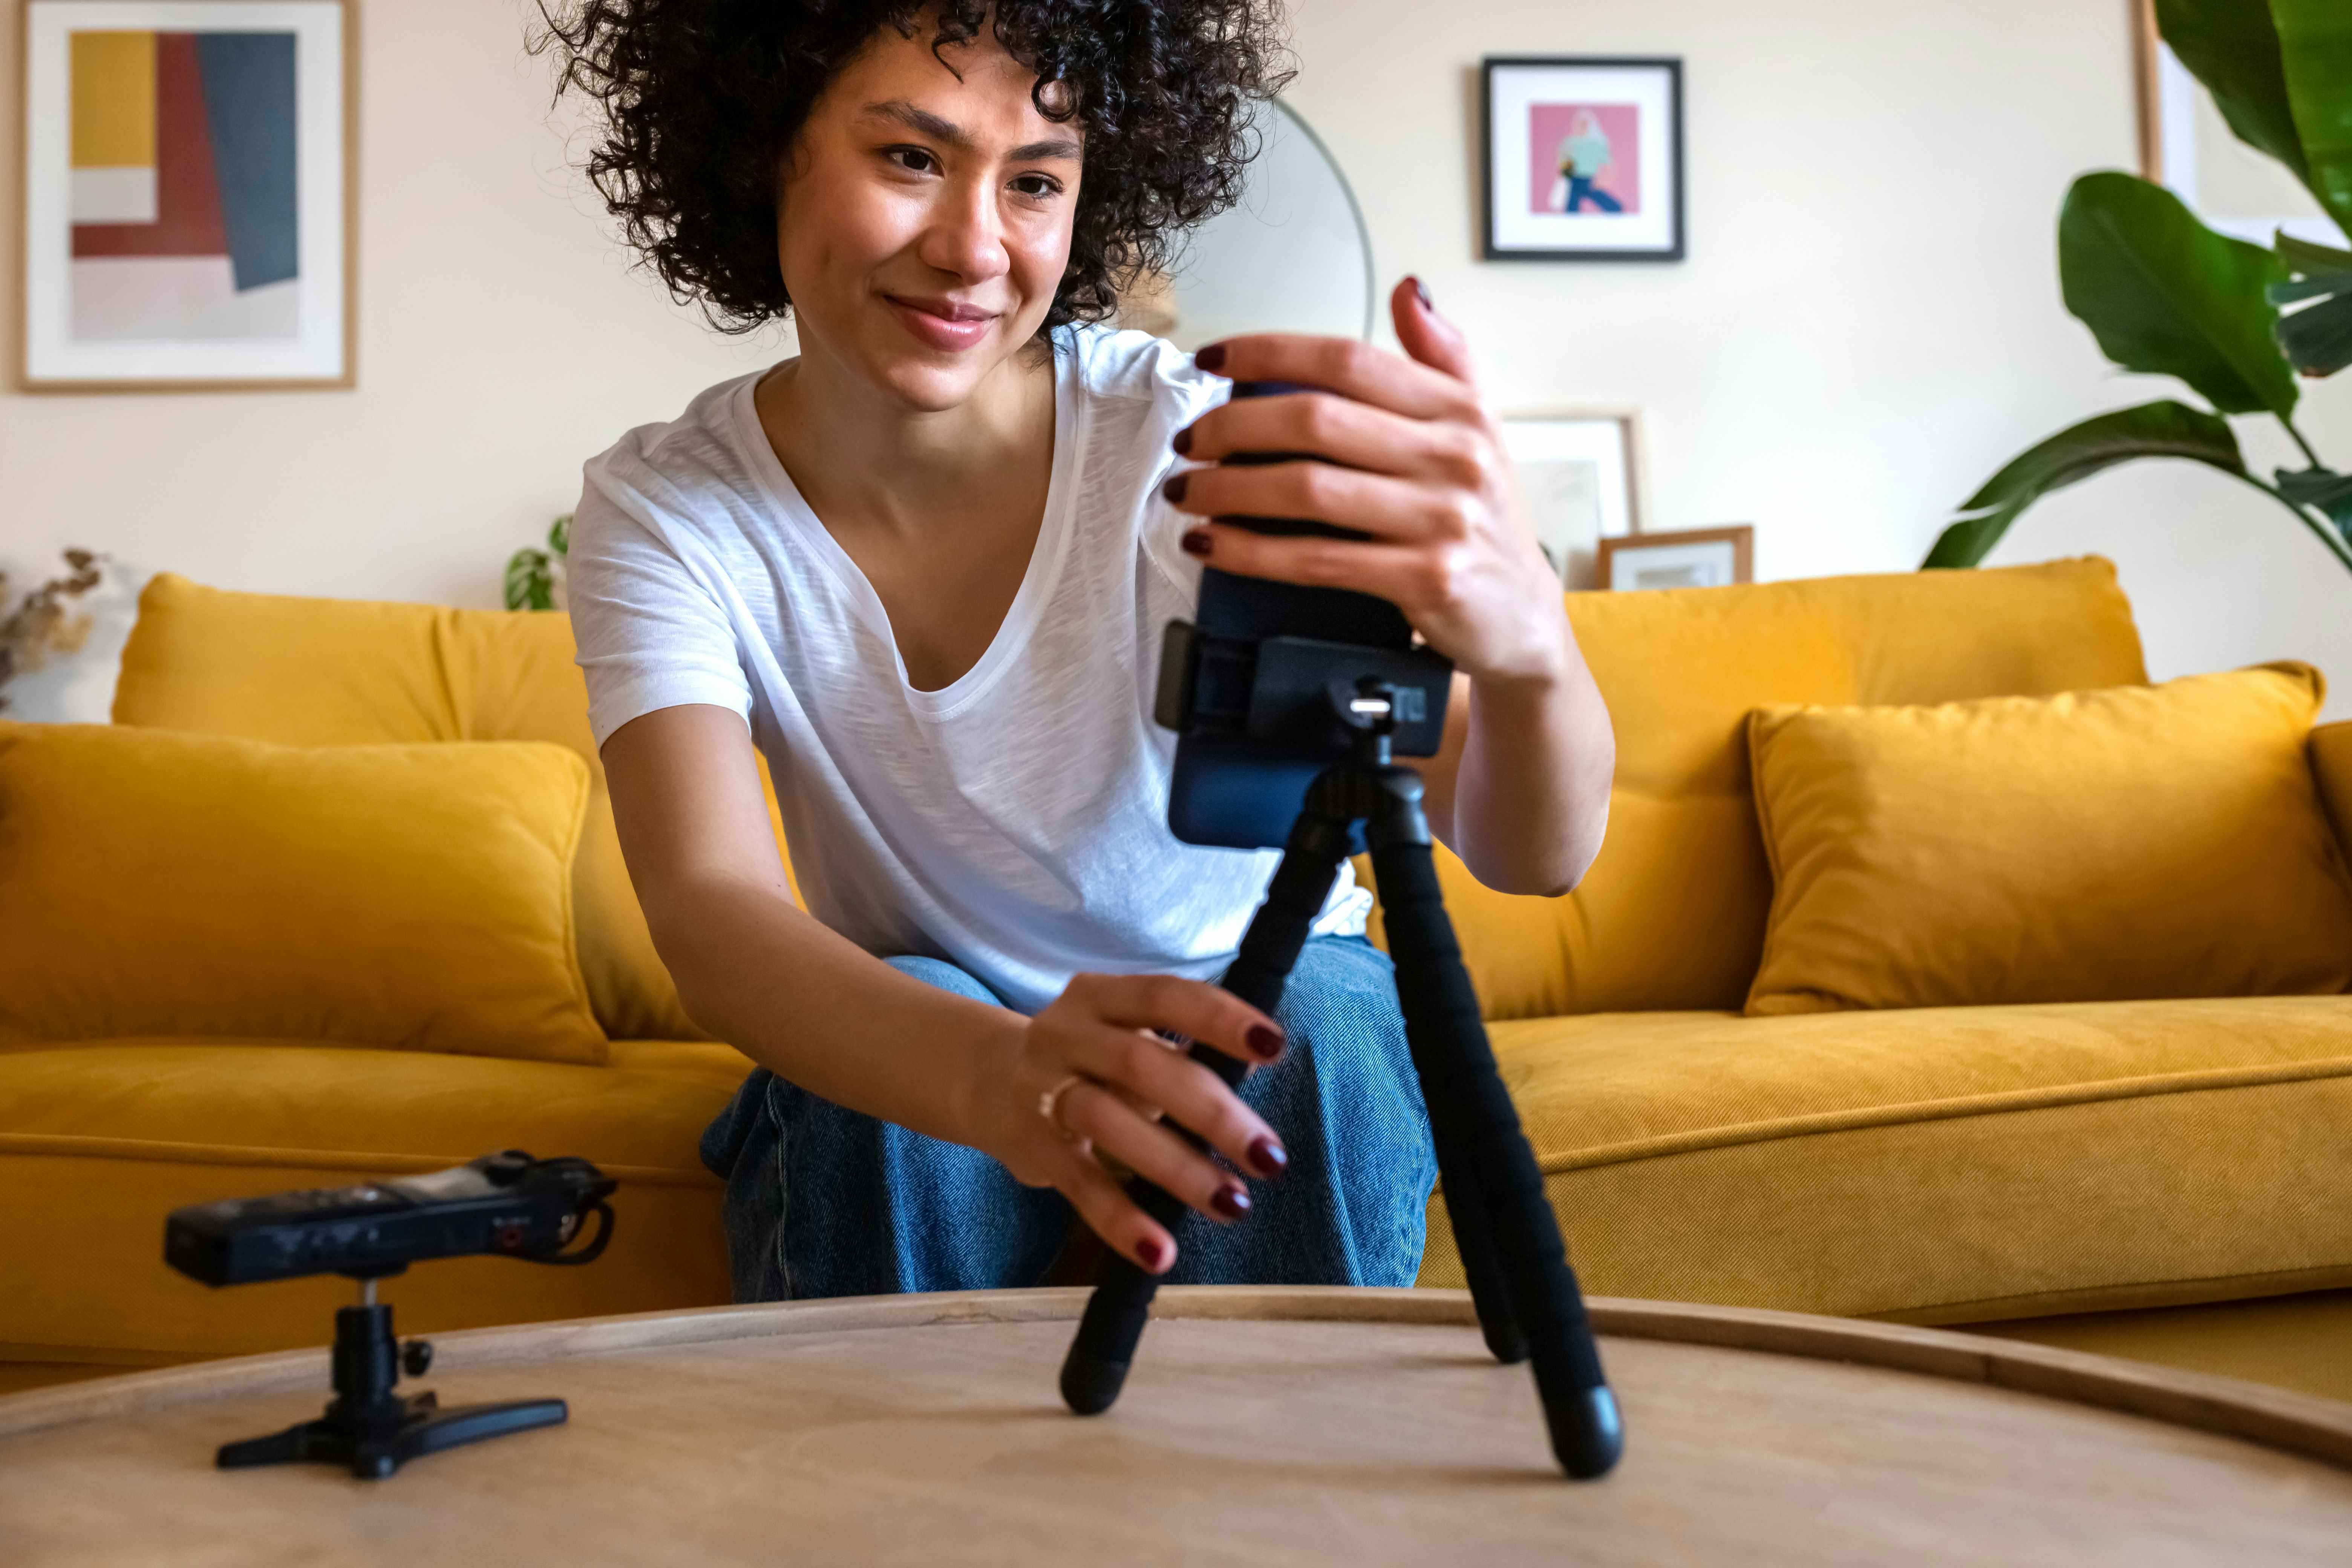 Woman setting up Camera while sitting on a yellow couch